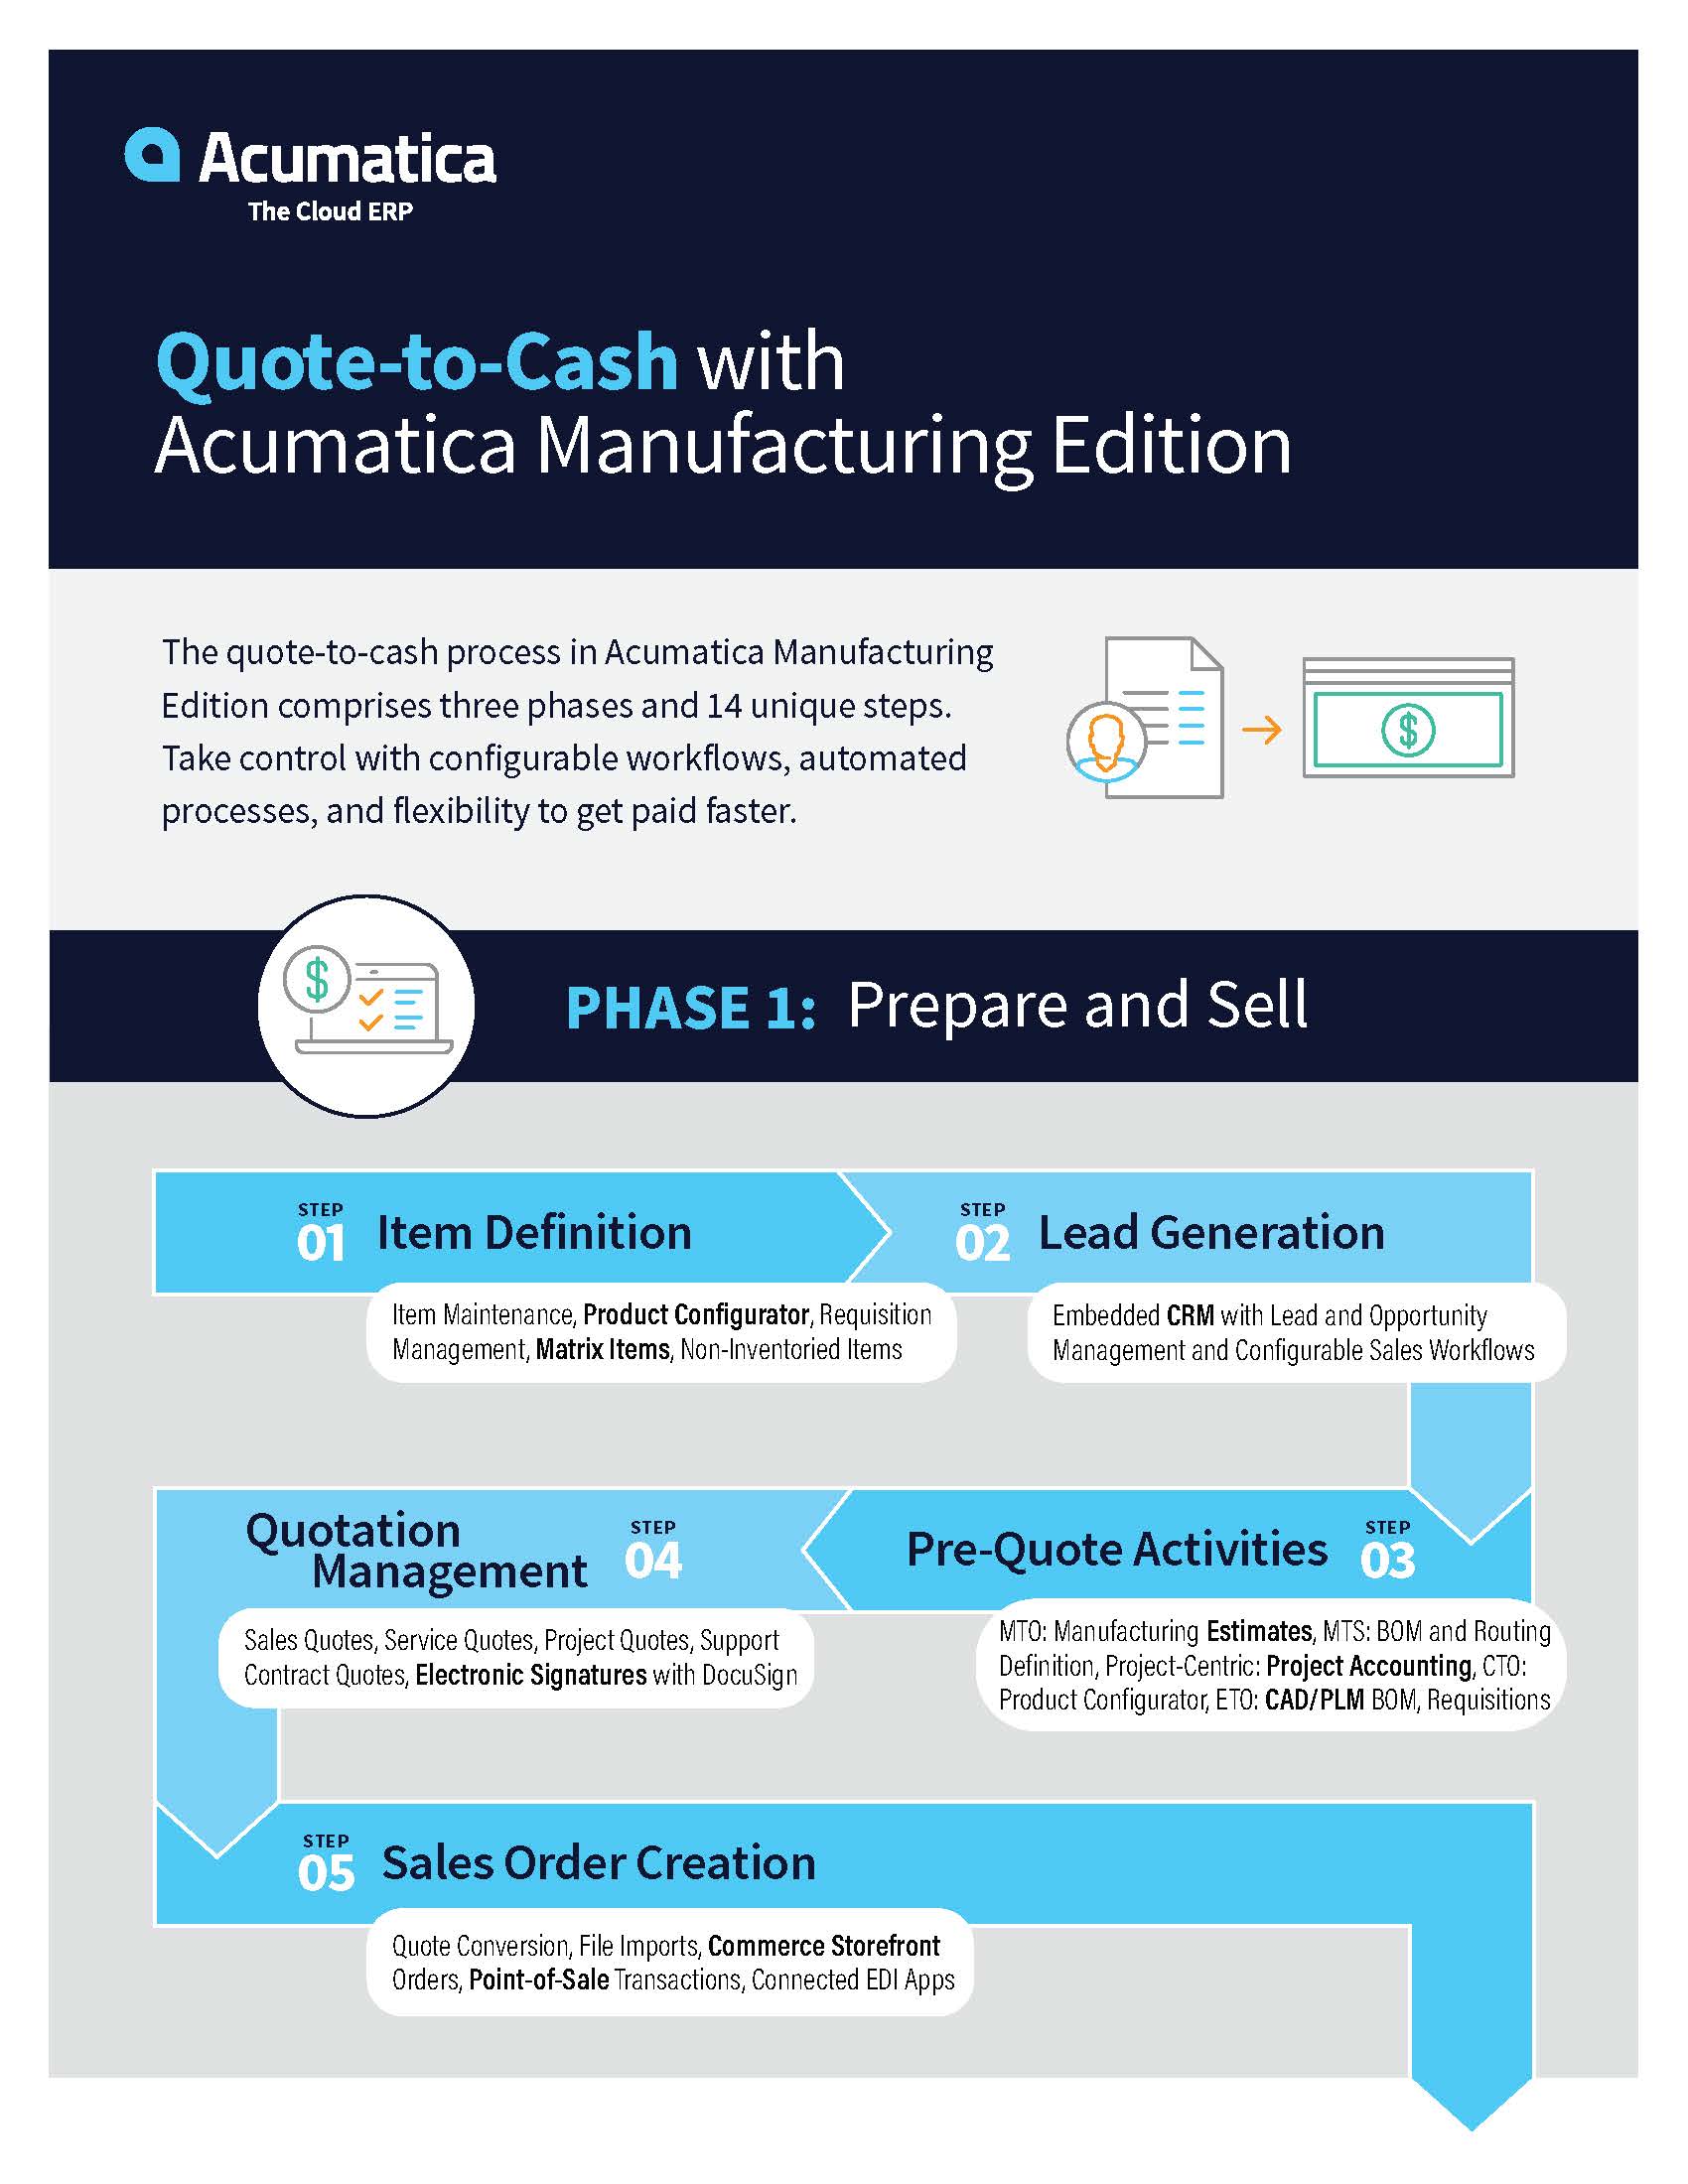 Quote-to-Cash with Acumatica Manufacturing Edition